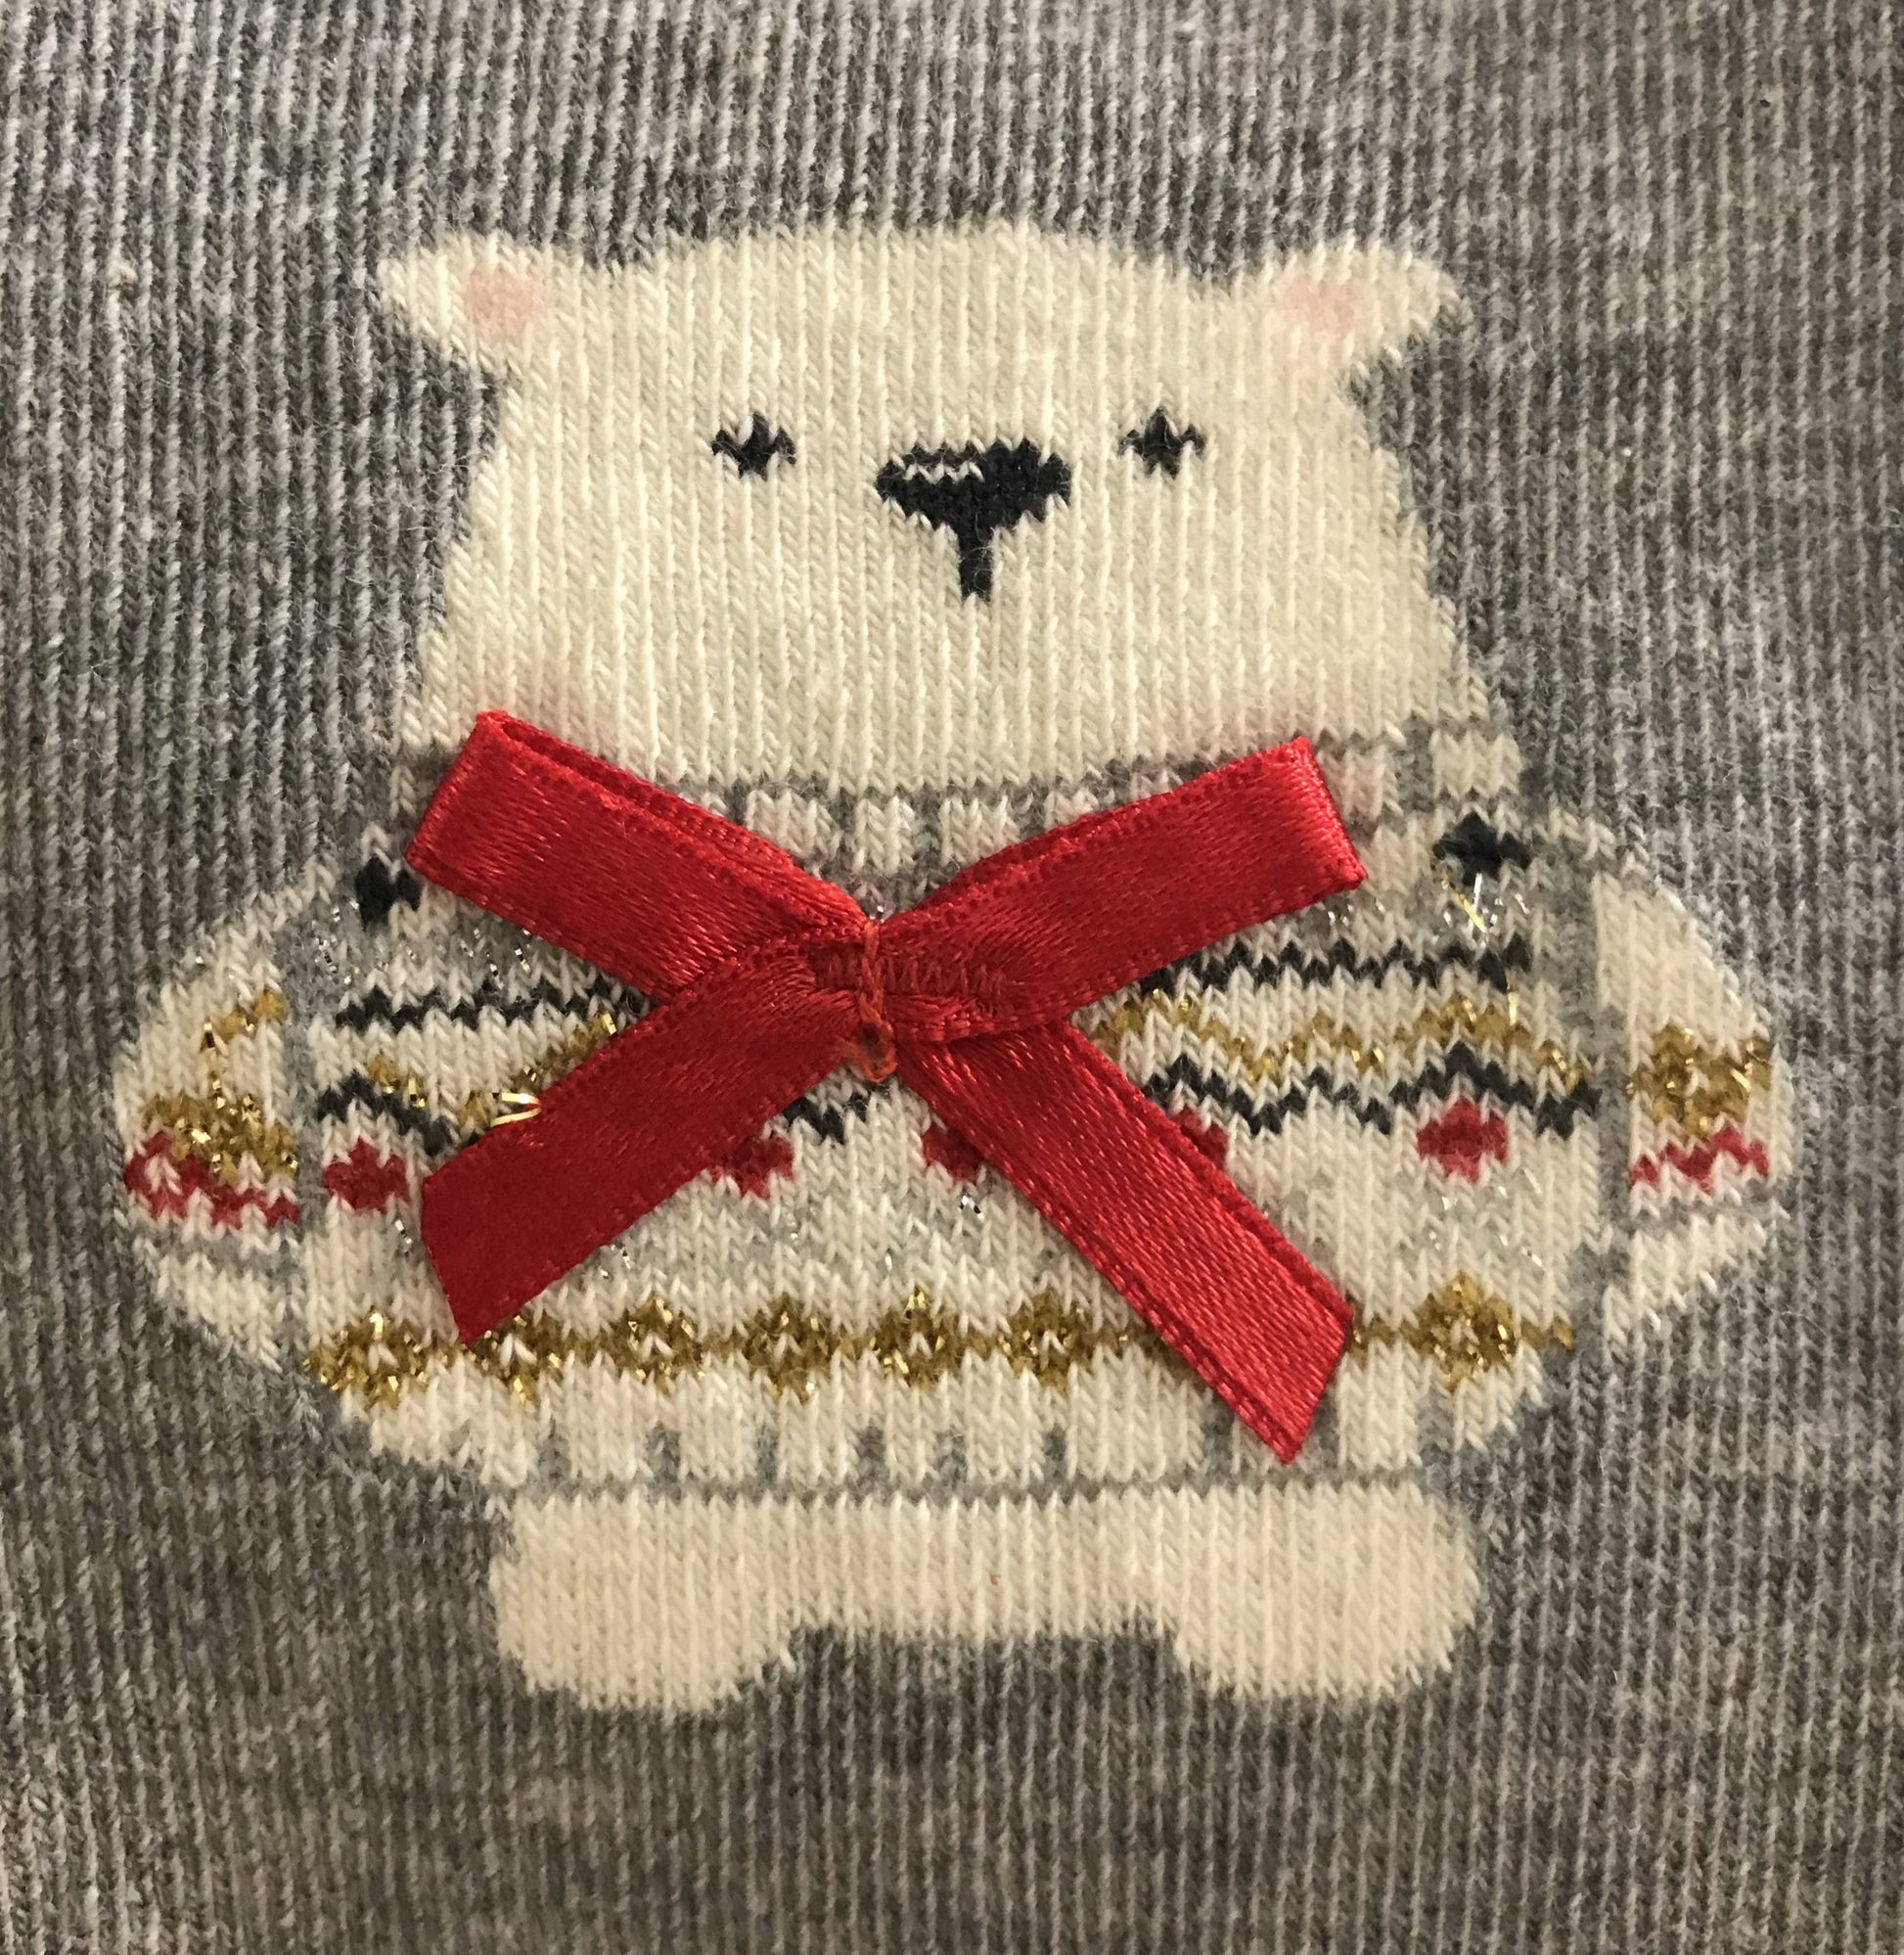 Light grey cotton mix Christmas ankle socks with a cute polar bear wearing a red satin bow and sparkly lurex fairisle style patterned sweater.